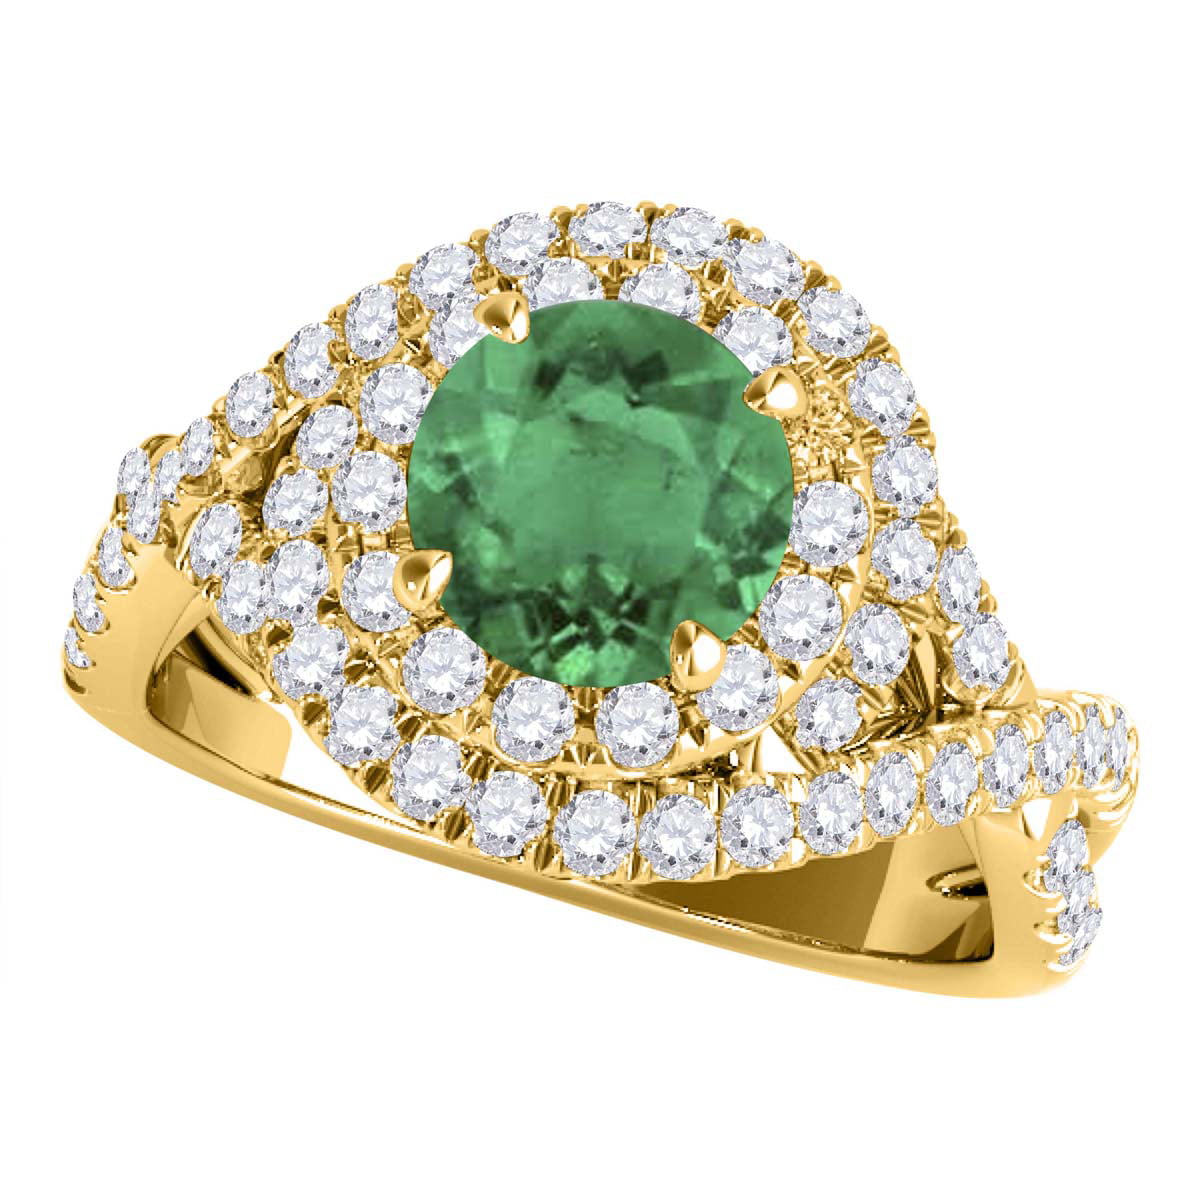 Vintage 1.10 Ct Emerald & Diamond Women's Engagement Ring 14K Yellow Gold Plated